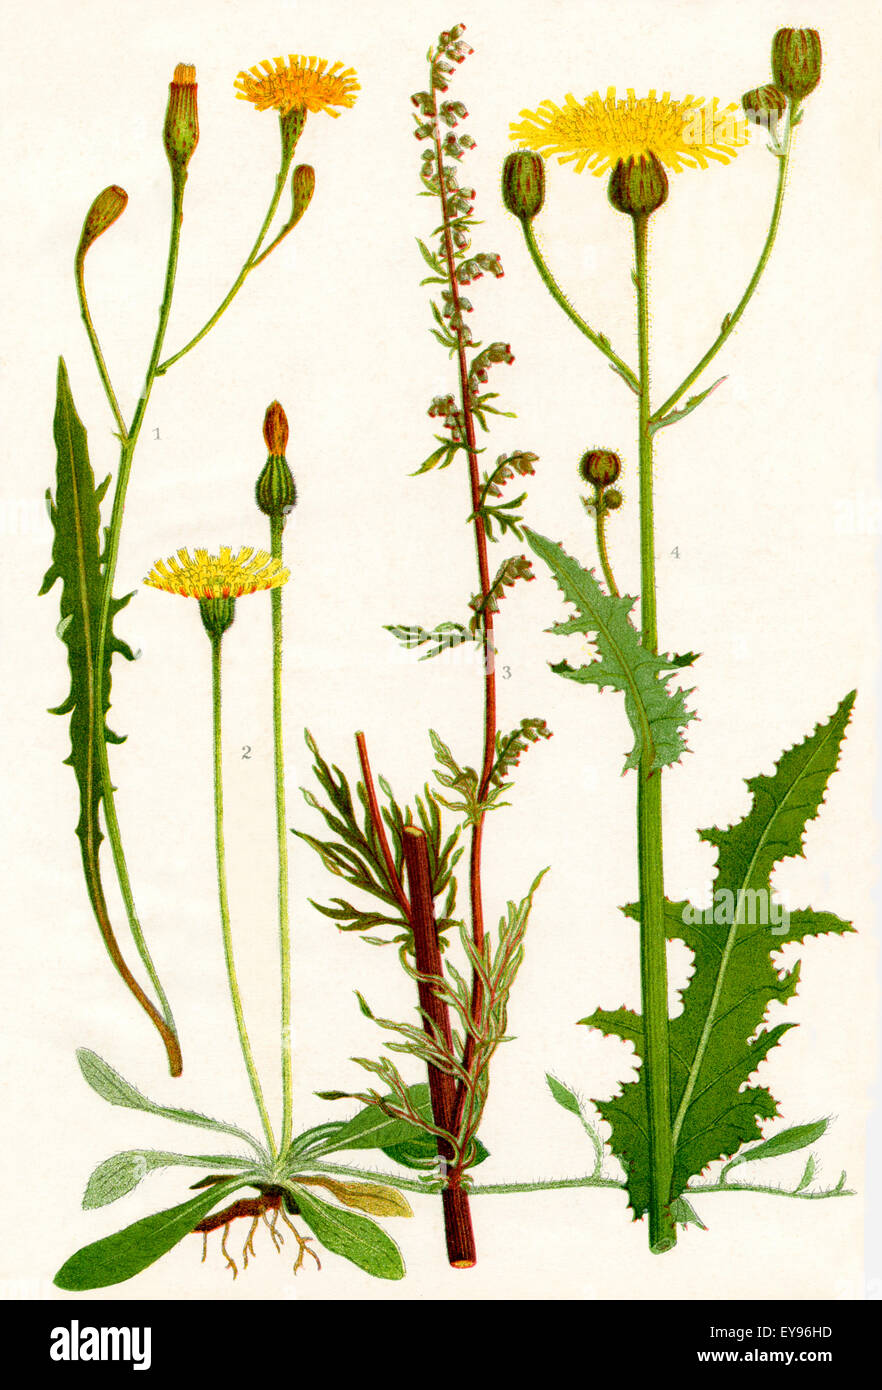 Wildflowers. 1. Cat's ear 2. Mouse ear Hawk weed 3. Mug wort 4. Corn Sow thistle Stock Photo